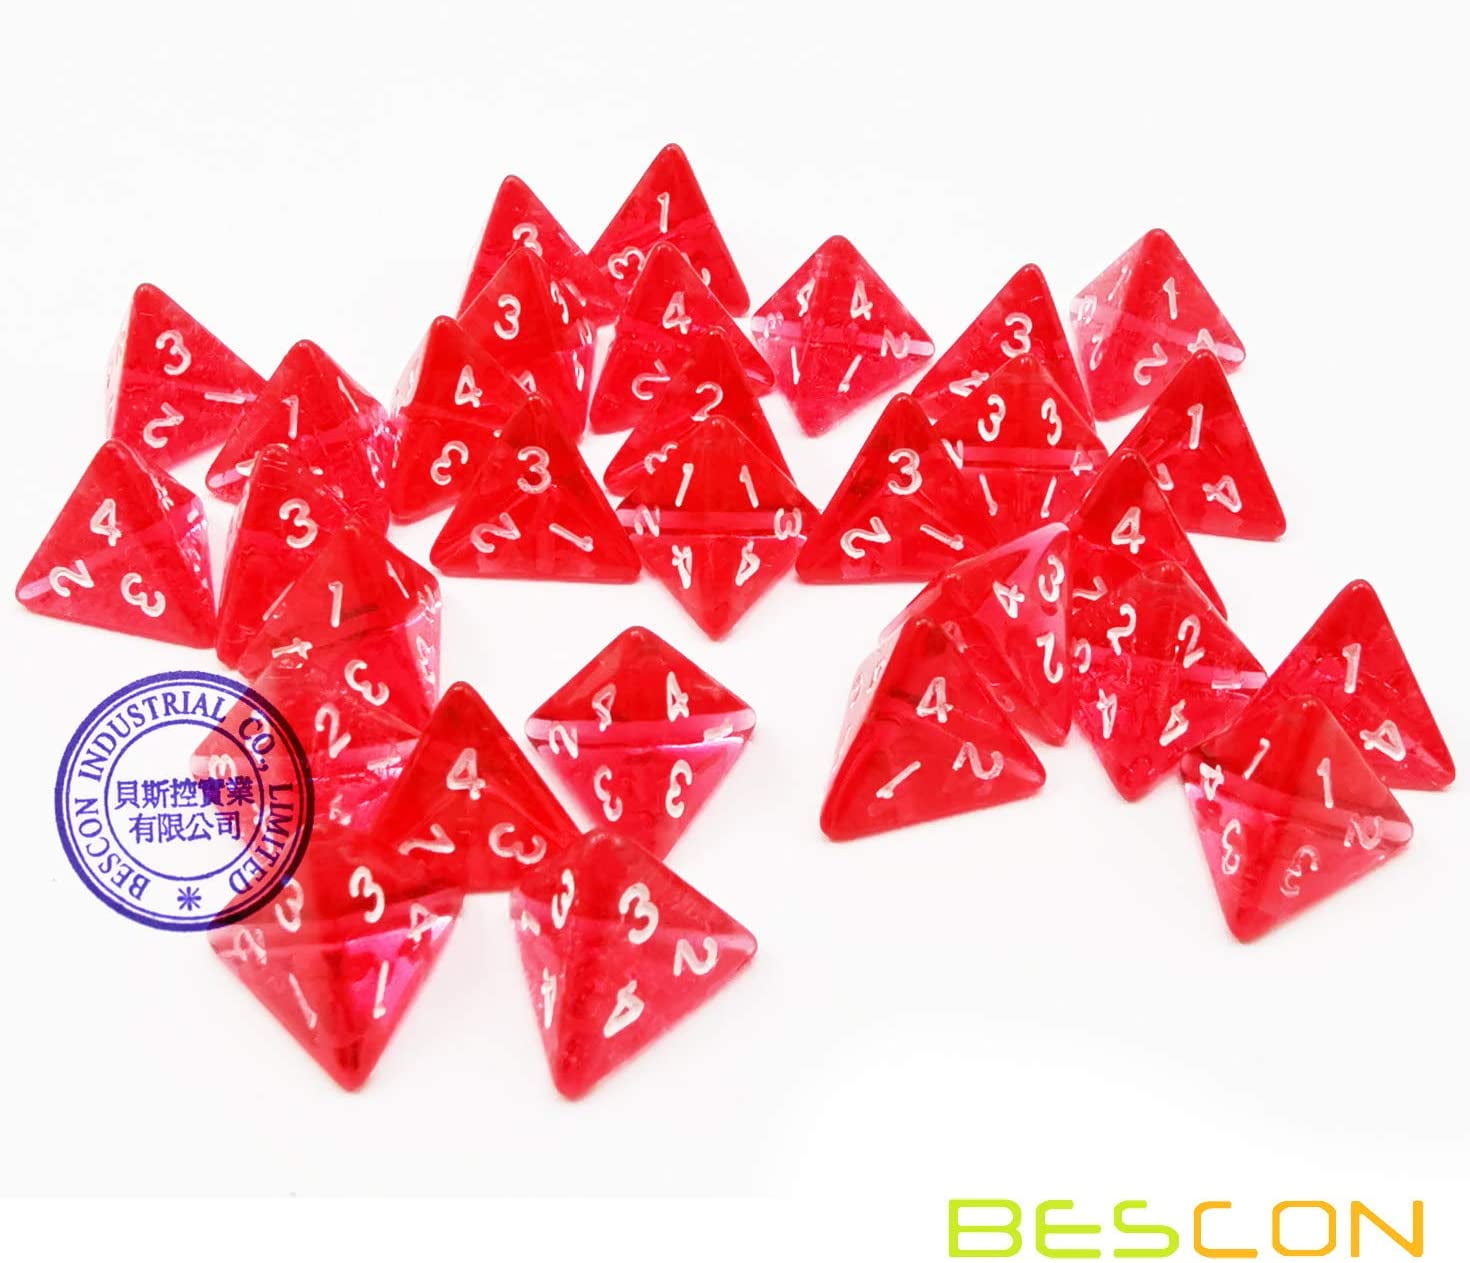 Bescon Mini Transparent Red D4 Dice 30pcs Healing Potion Bottle 30pcs Roleplaying Mini Red Gem D4 Dice Healing Potion Pack in Glass Jar 